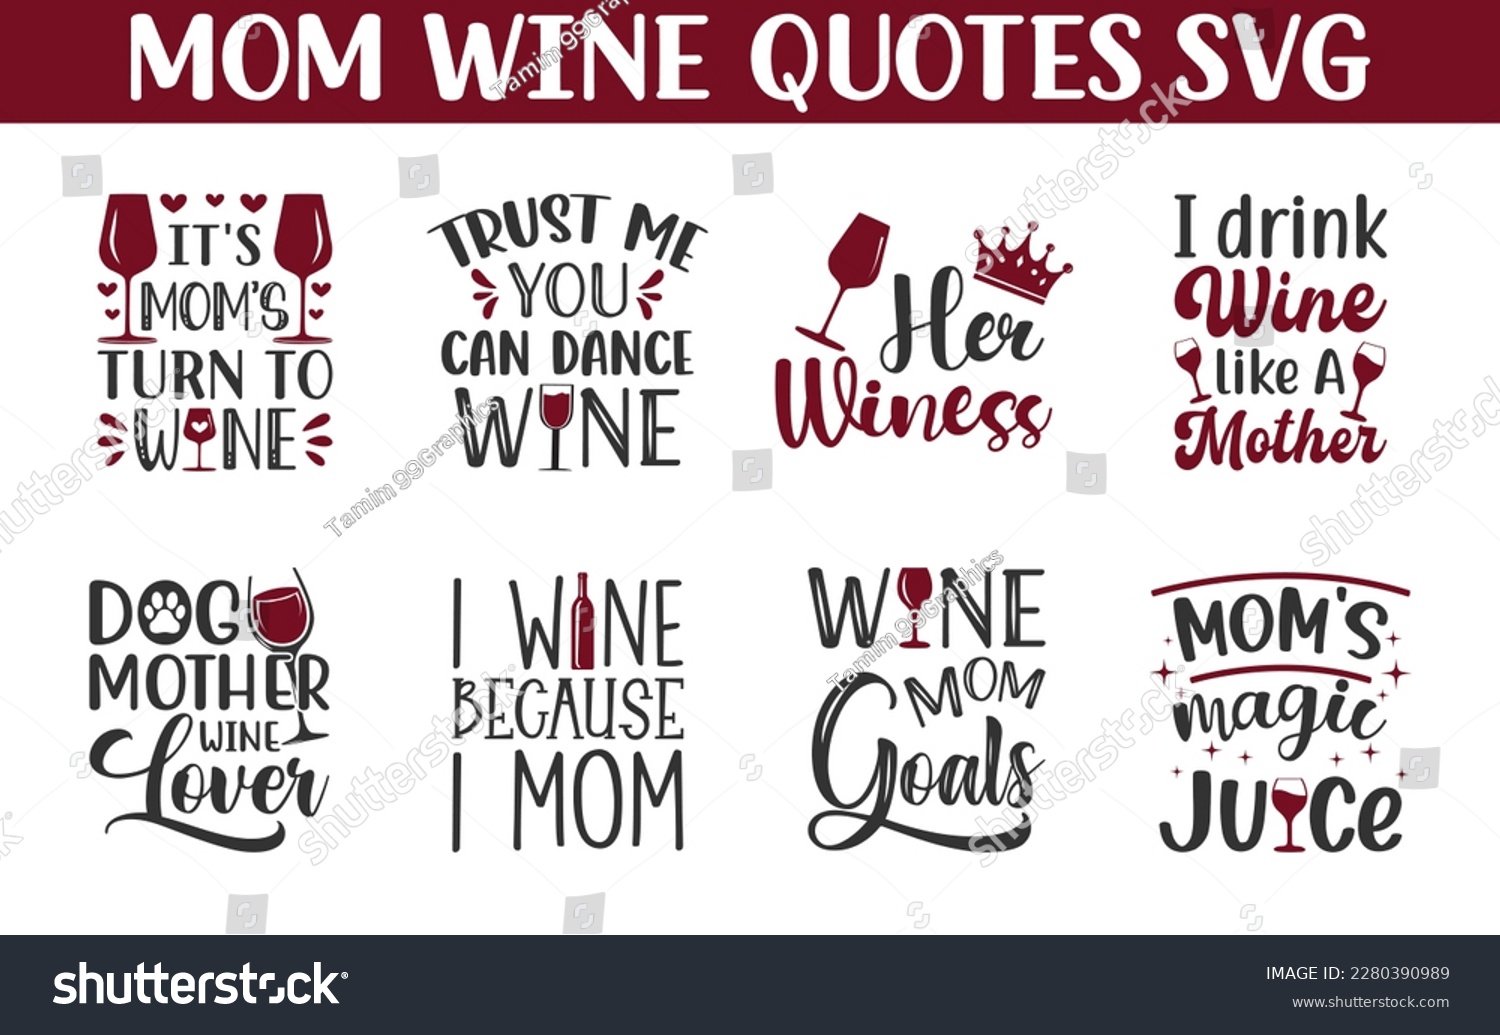 SVG of Wine and Mom Quotes.
Wine Mom SVG bundle on white background. svg